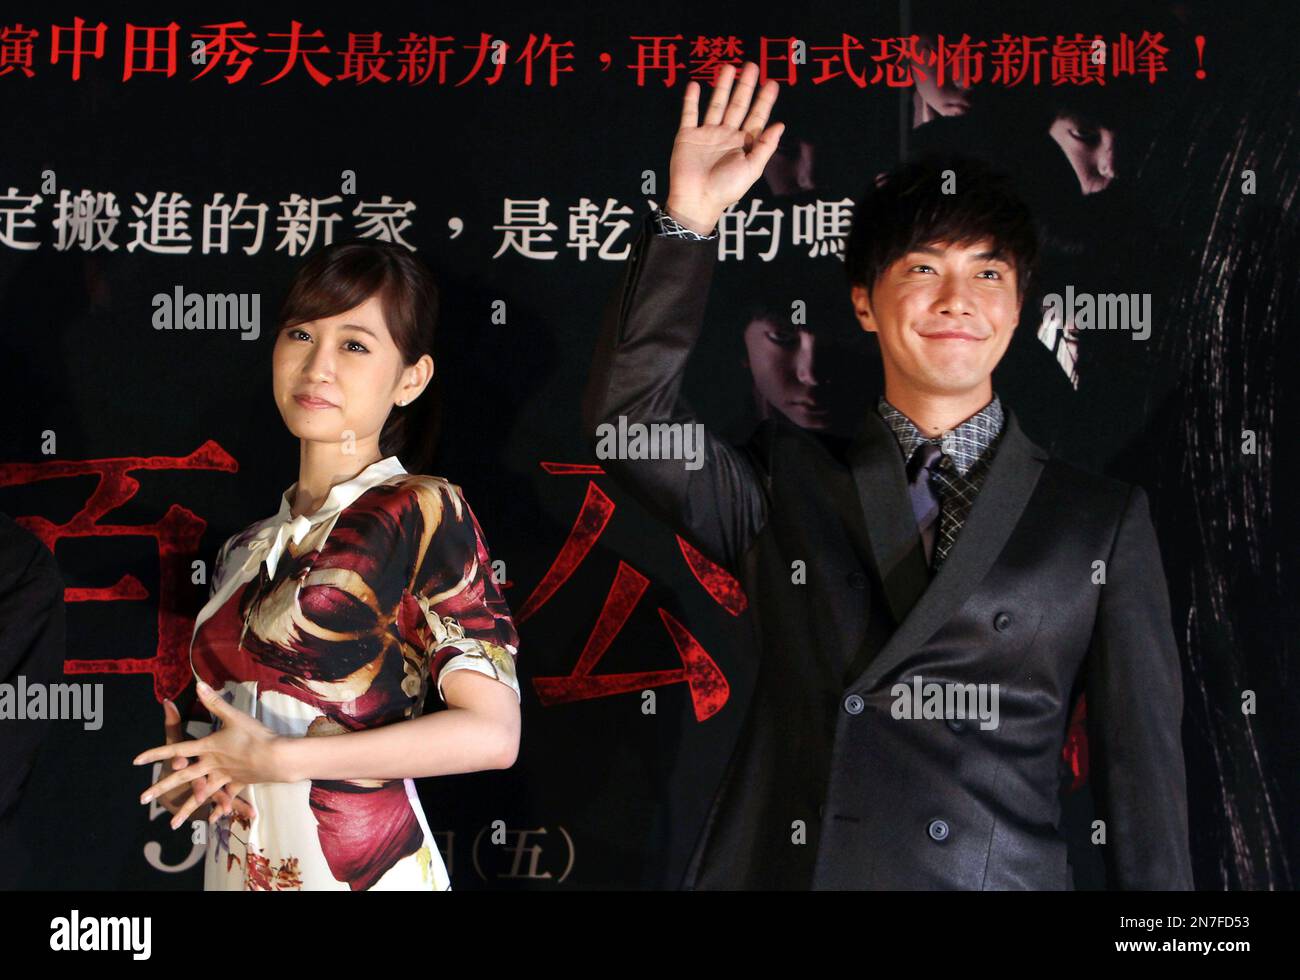 Japanese actress Maeda Atsuko, left, and actor Hiroki Narimiya pose during an event to promote their movie "The Complex" in Taipei, Taiwan, Saturday, May 18, 2013. (AP Photo/Chiang Ying-ying) Stock Photo